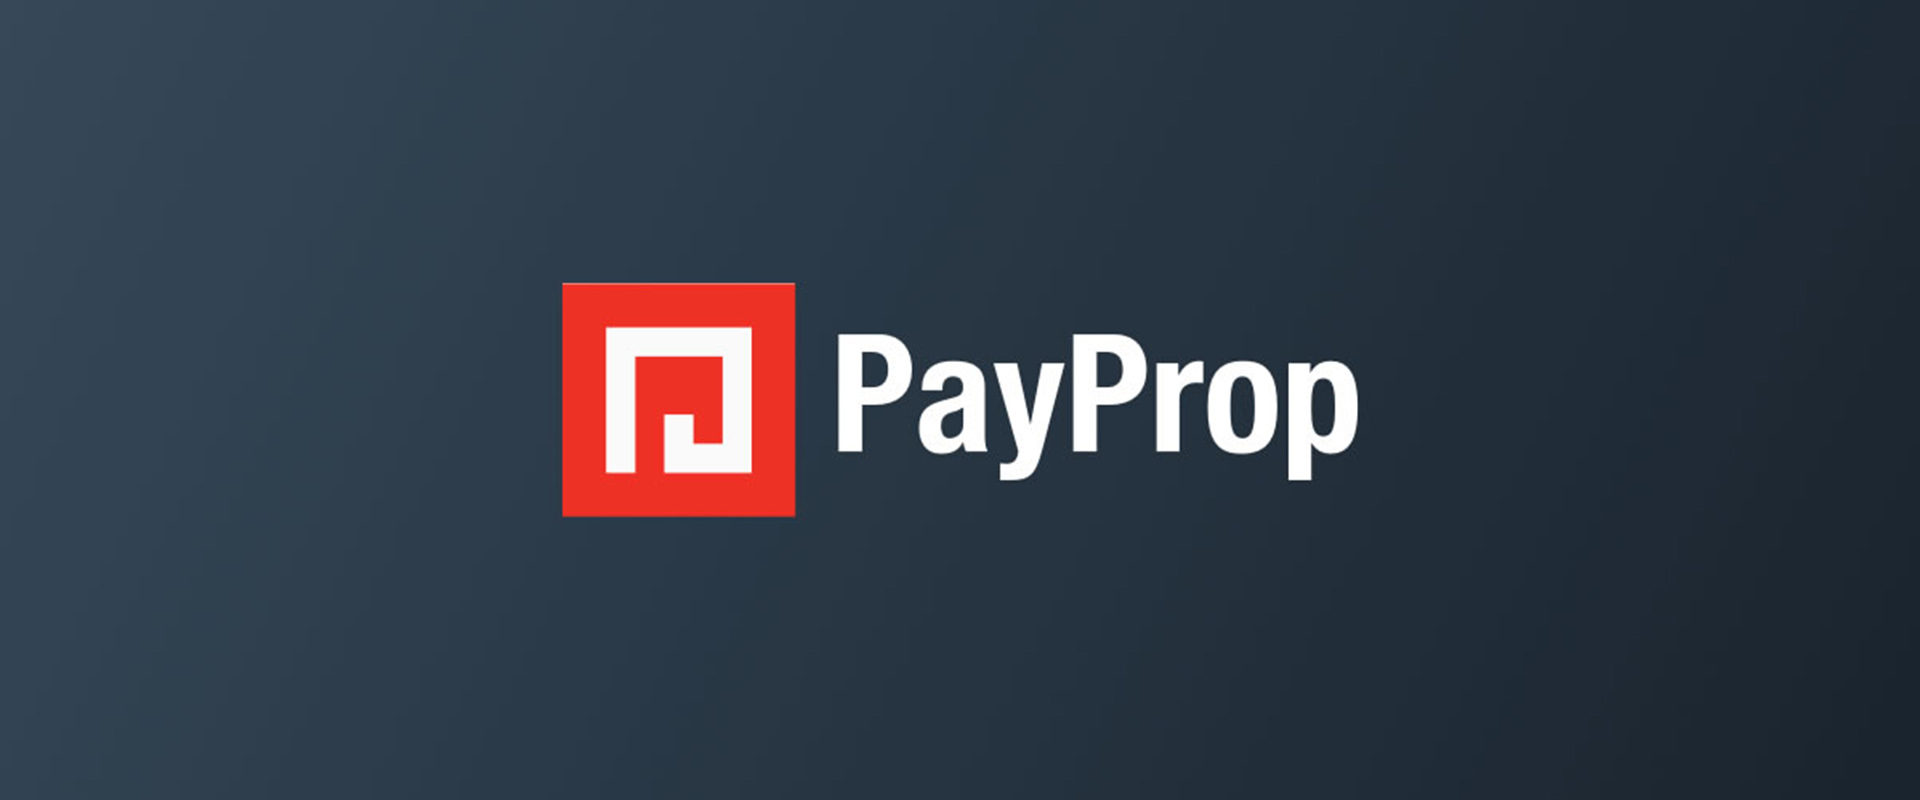 PayProp wins Tech Company of the Year